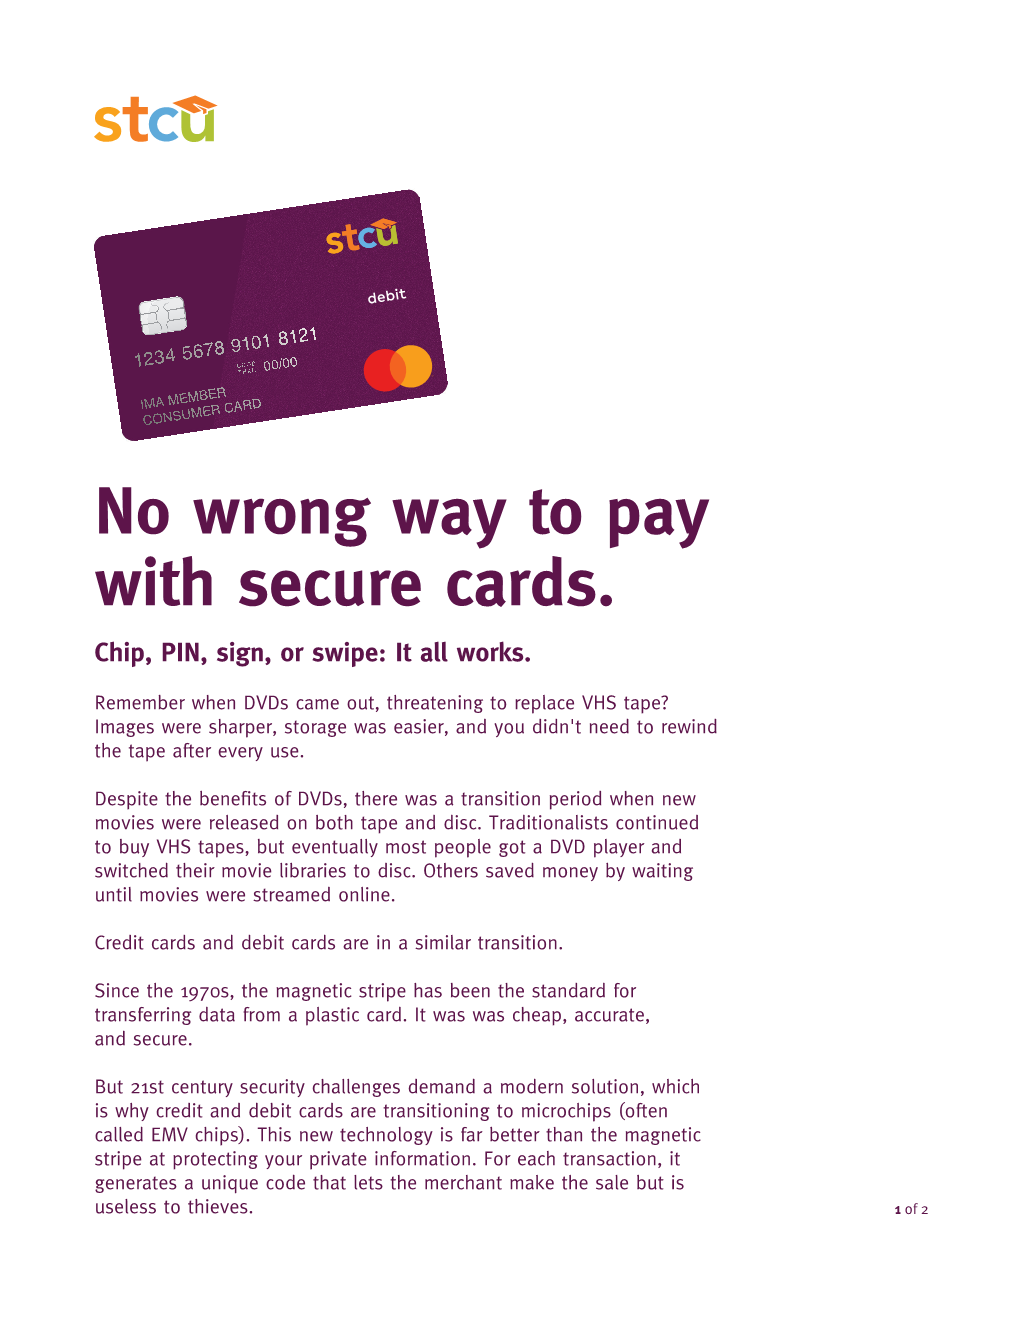 No Wrong Way to Pay with Secure Cards